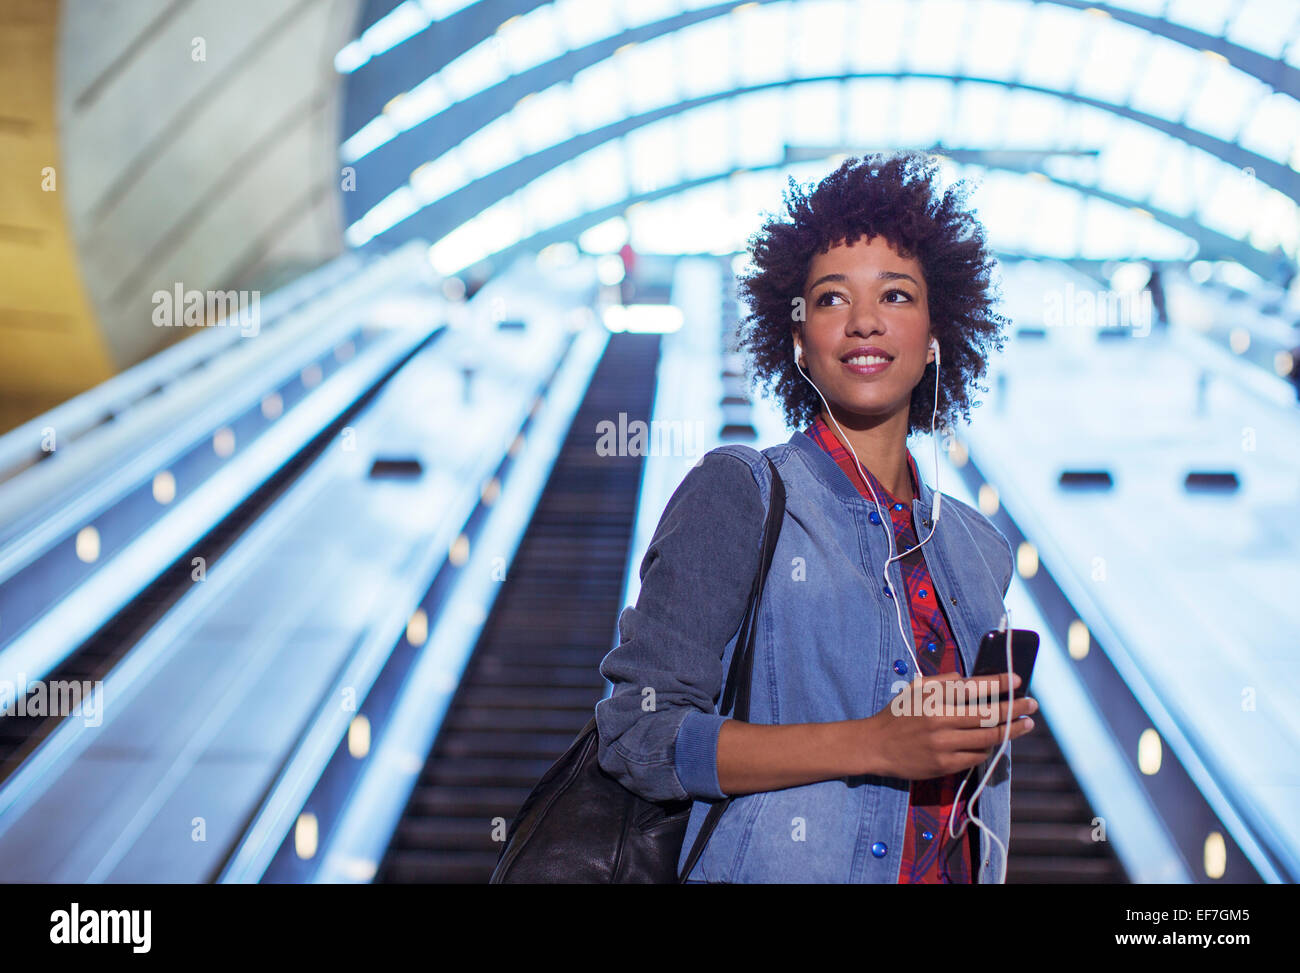 Woman listening to earbuds on escalator Stock Photo